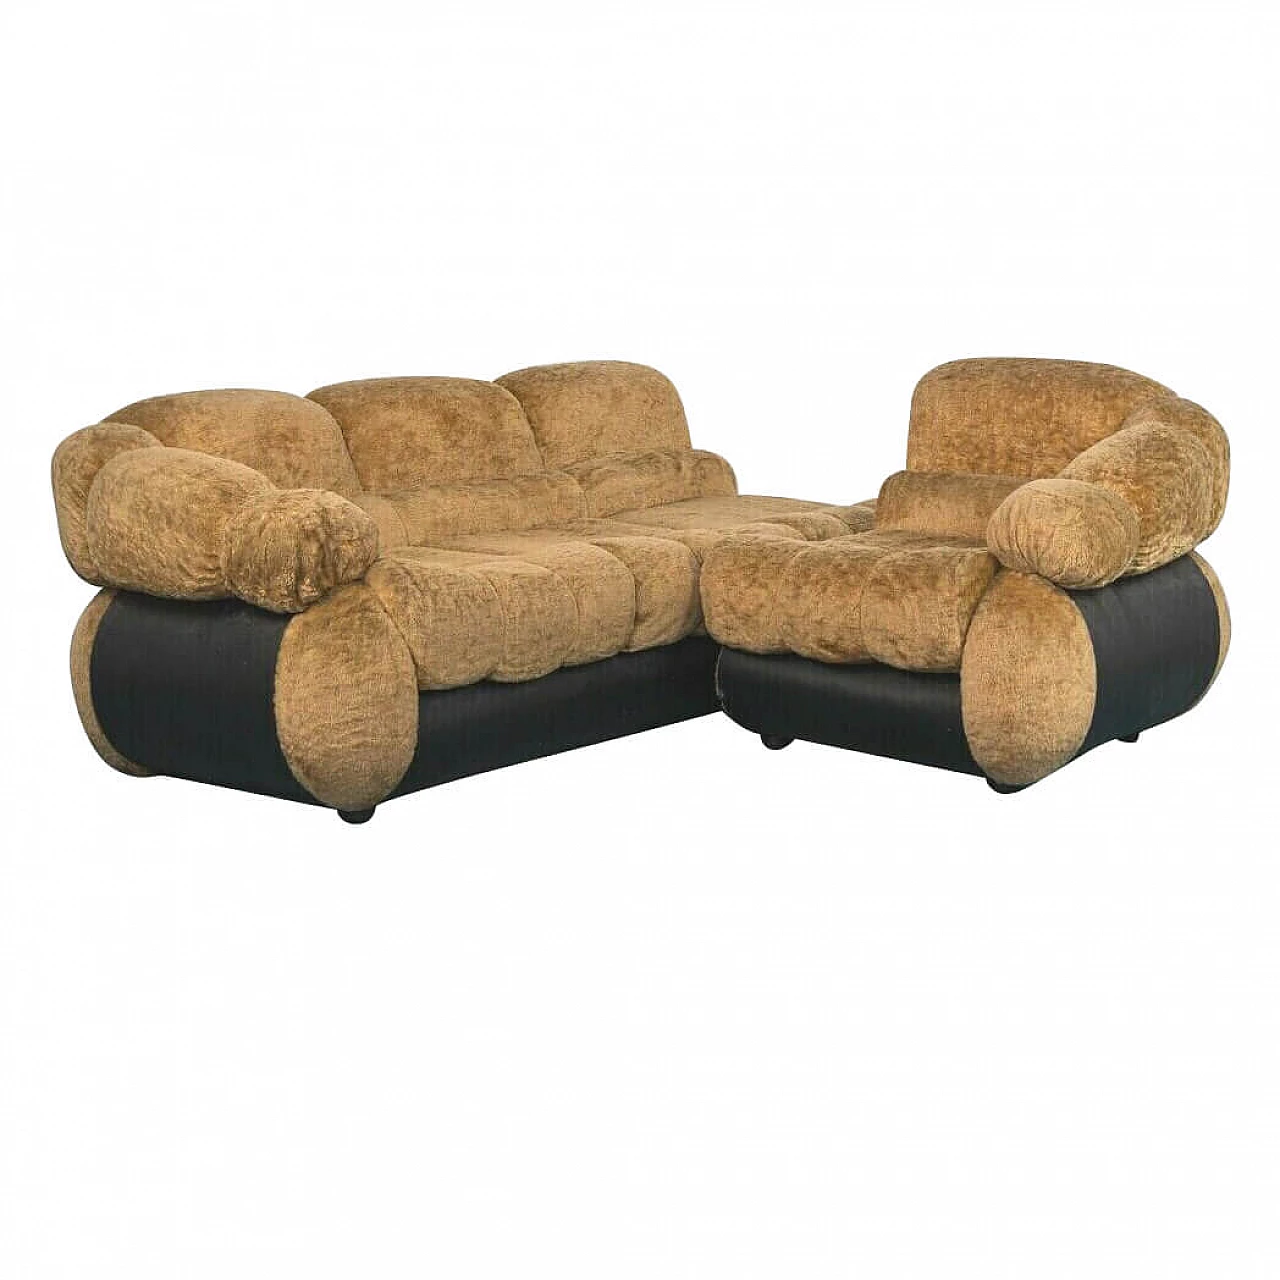 Sofa and armchair by Adriano Piazzesi, 1970s 1190330